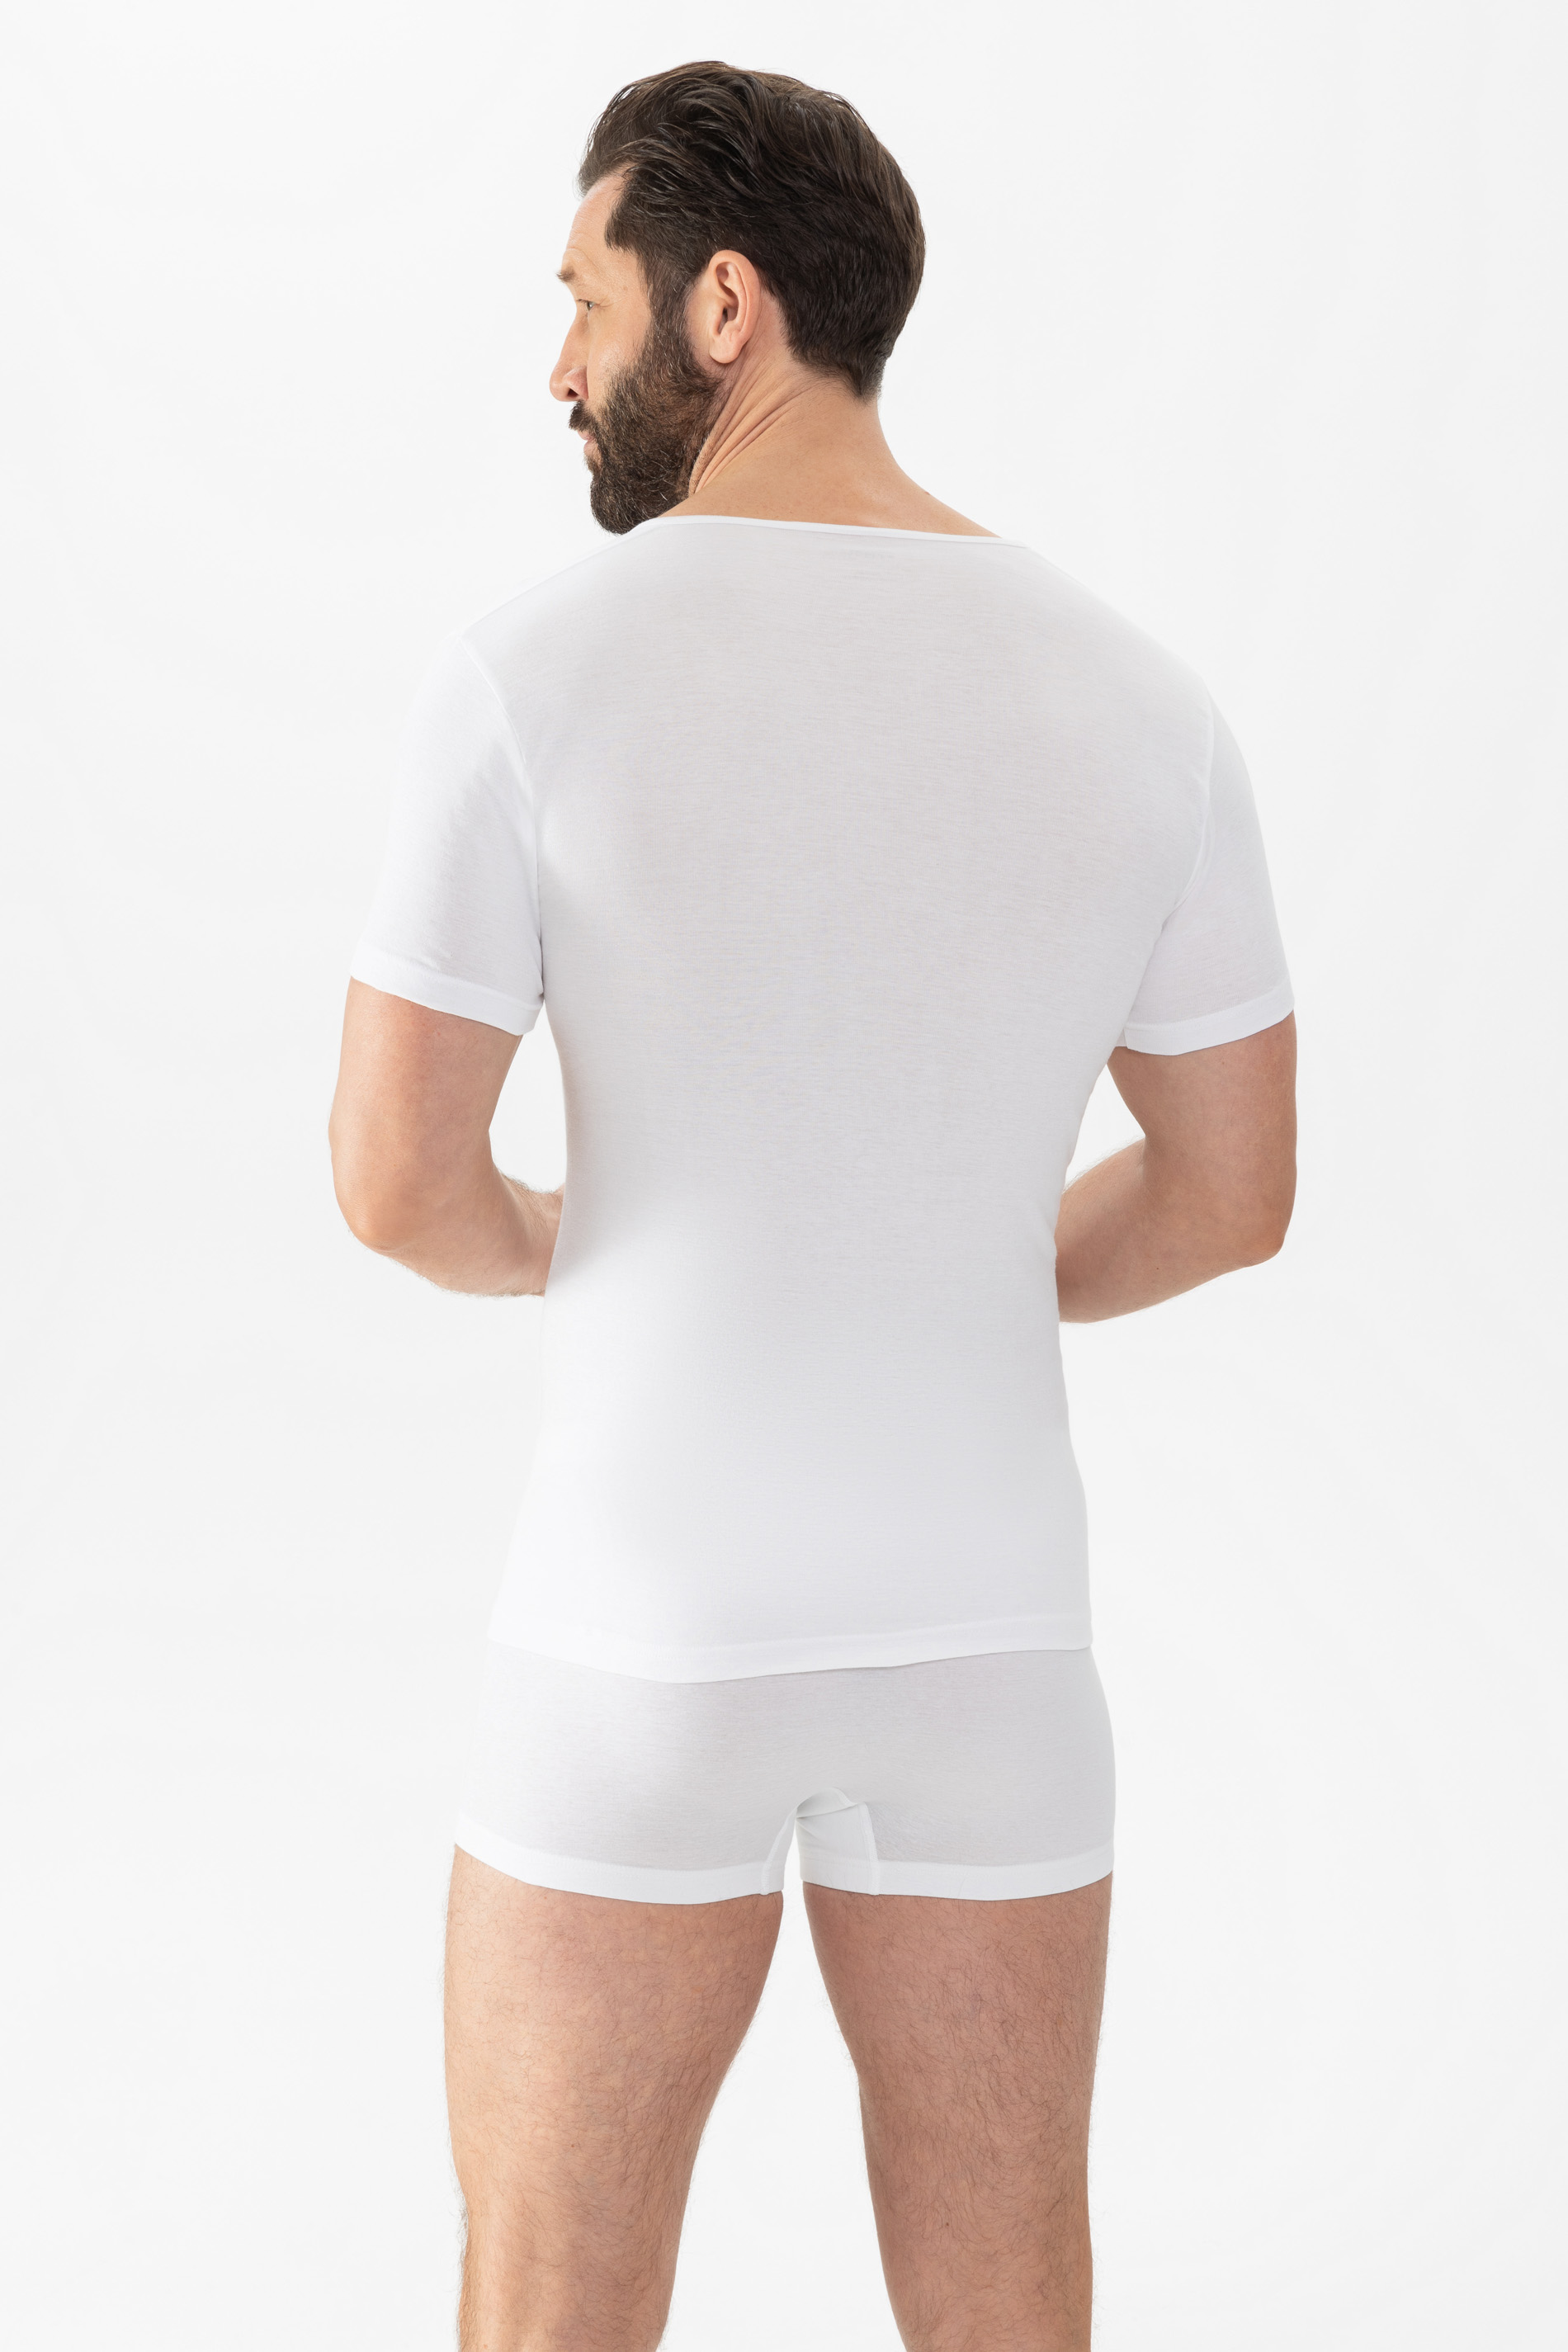 Men's shirt with V-neck White Serie Casual Cotton Rear View | mey®